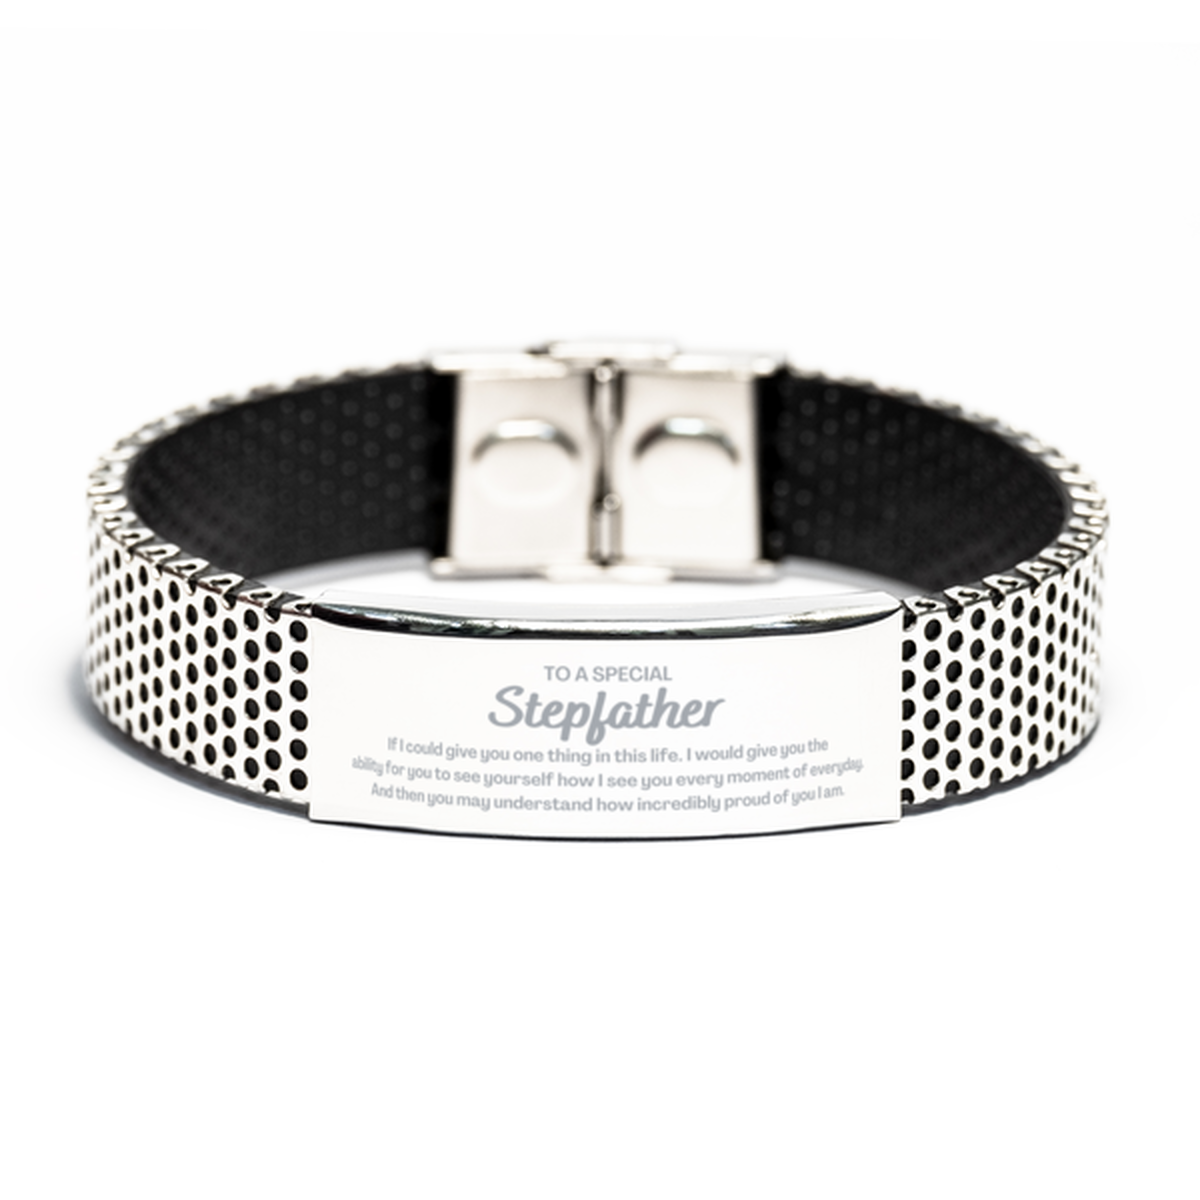 To My Stepfather Stainless Steel Bracelet, Gifts For Stepfather Engraved, Inspirational Gifts for Christmas Birthday, Epic Gifts for Stepfather To A Special Stepfather how incredibly proud of you I am